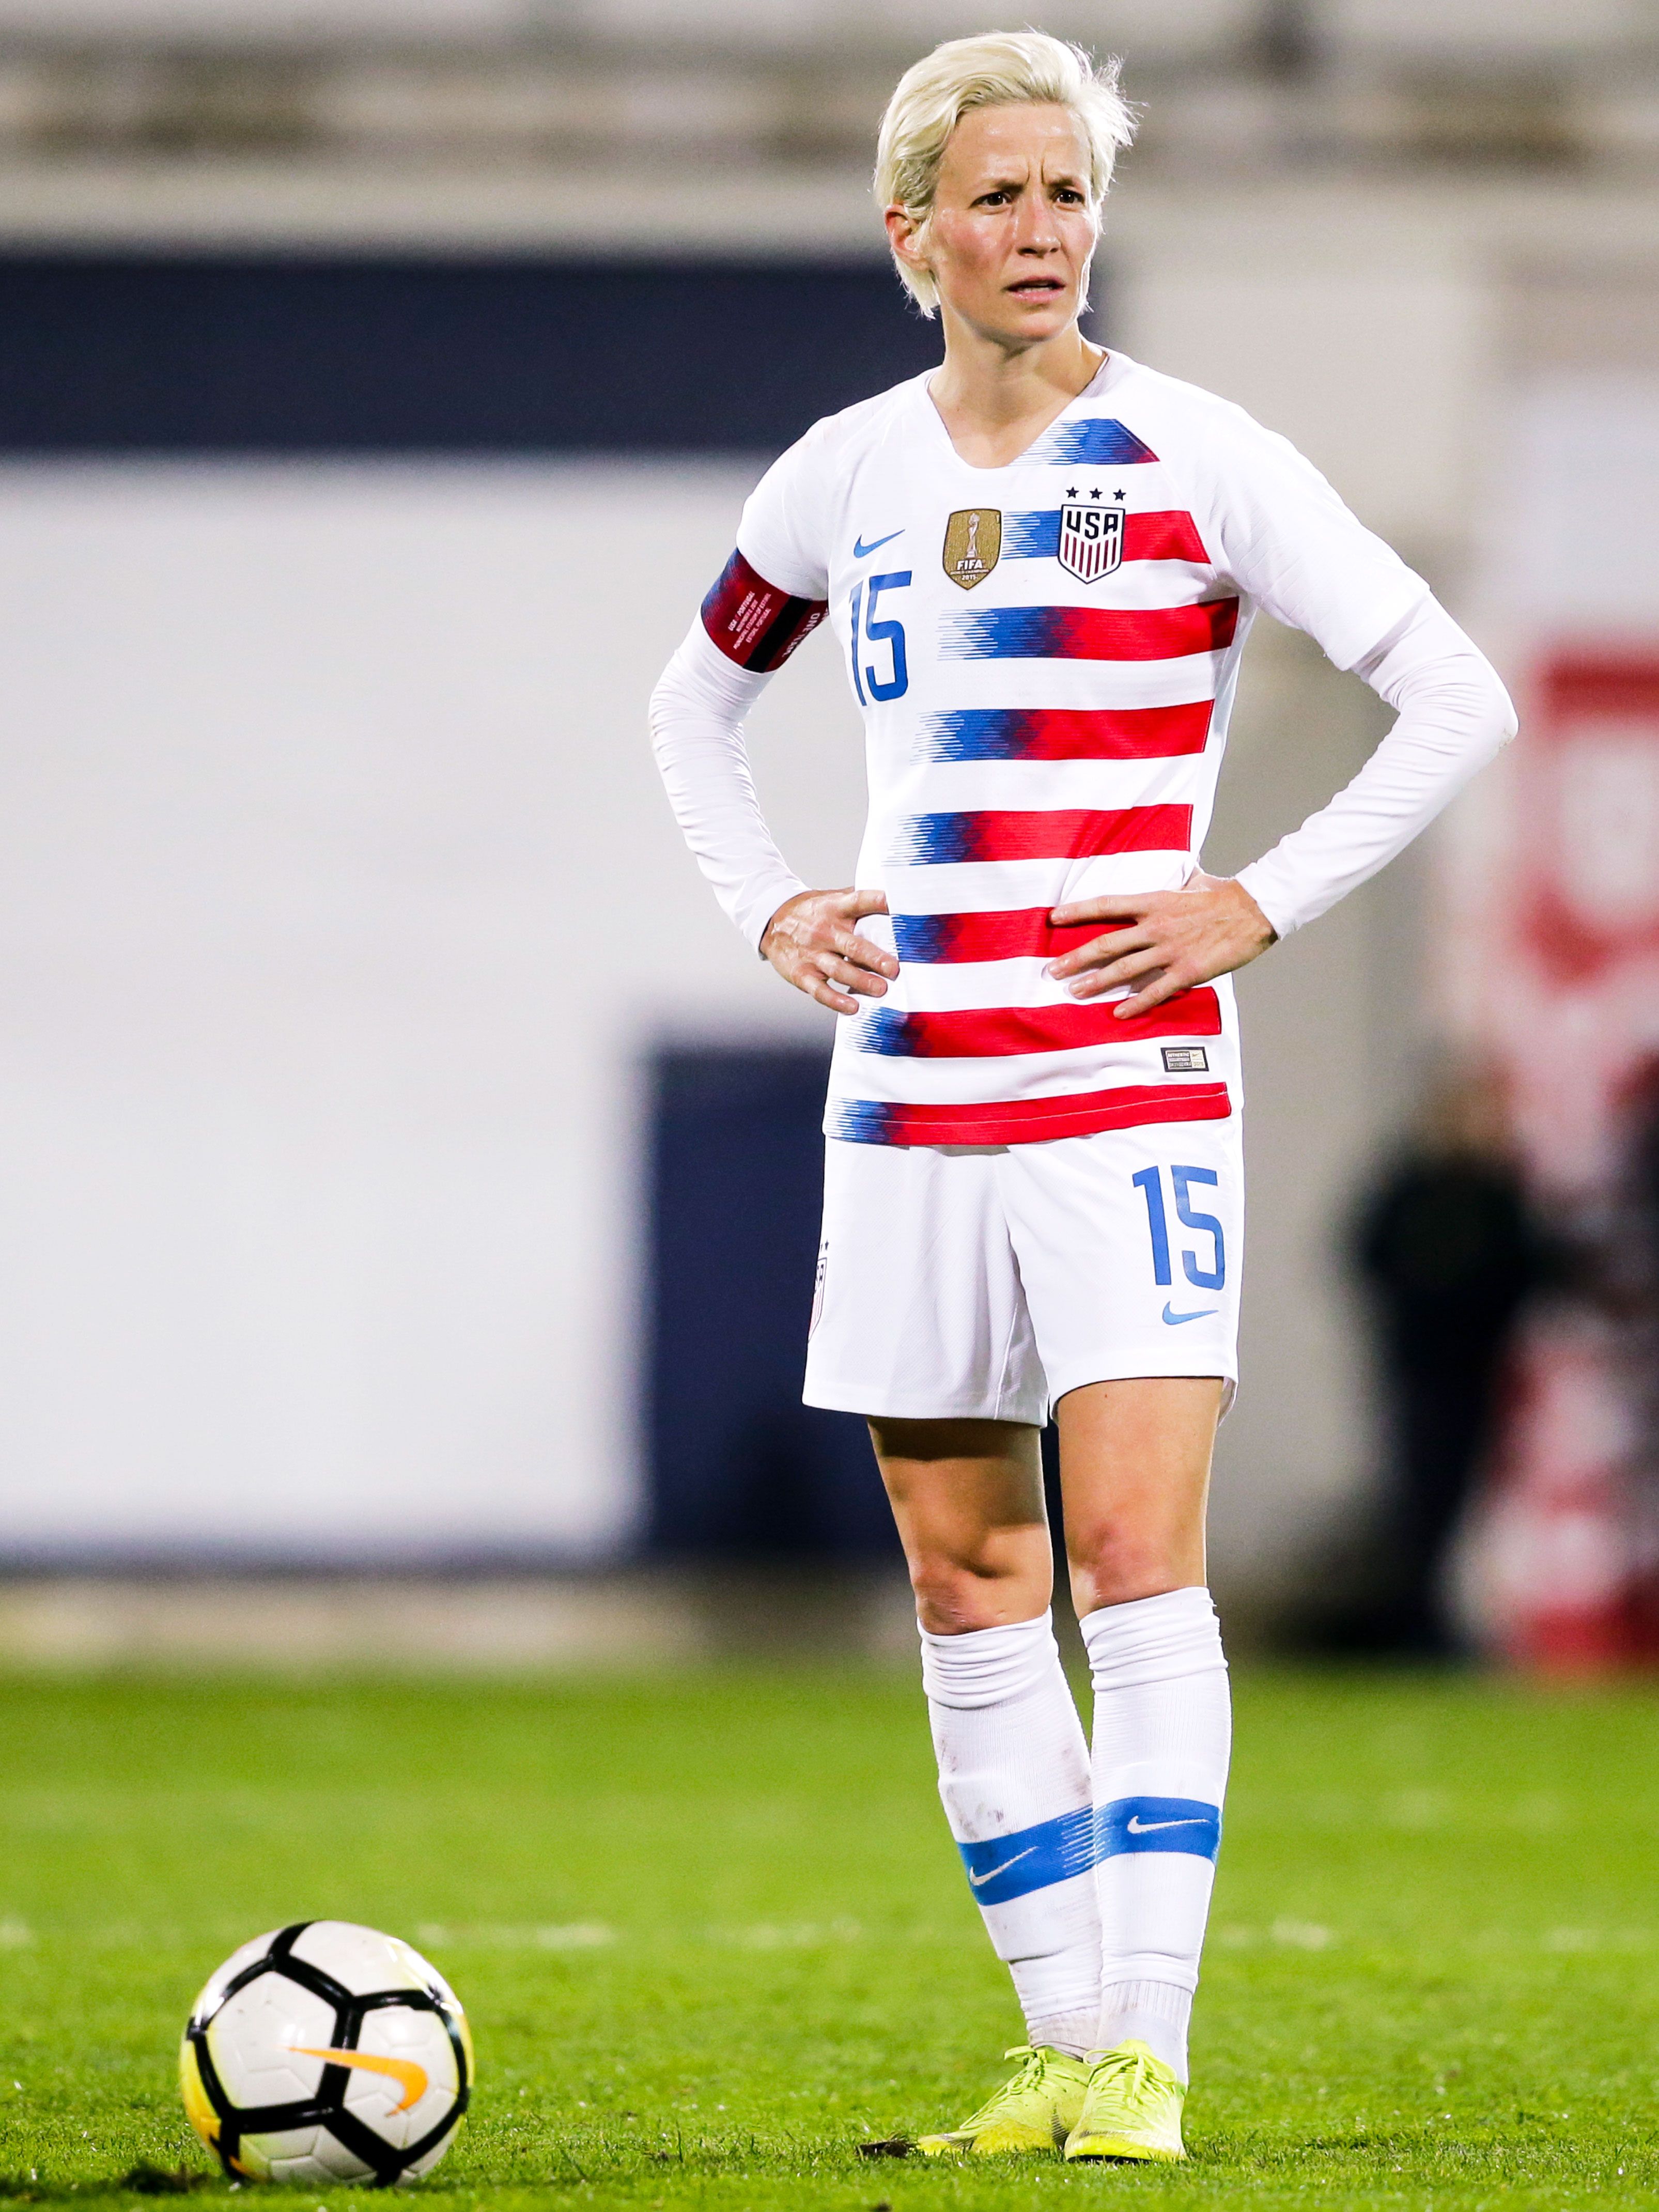 Who is Megan Rapinoe's twin sister and fellow professional soccer player?